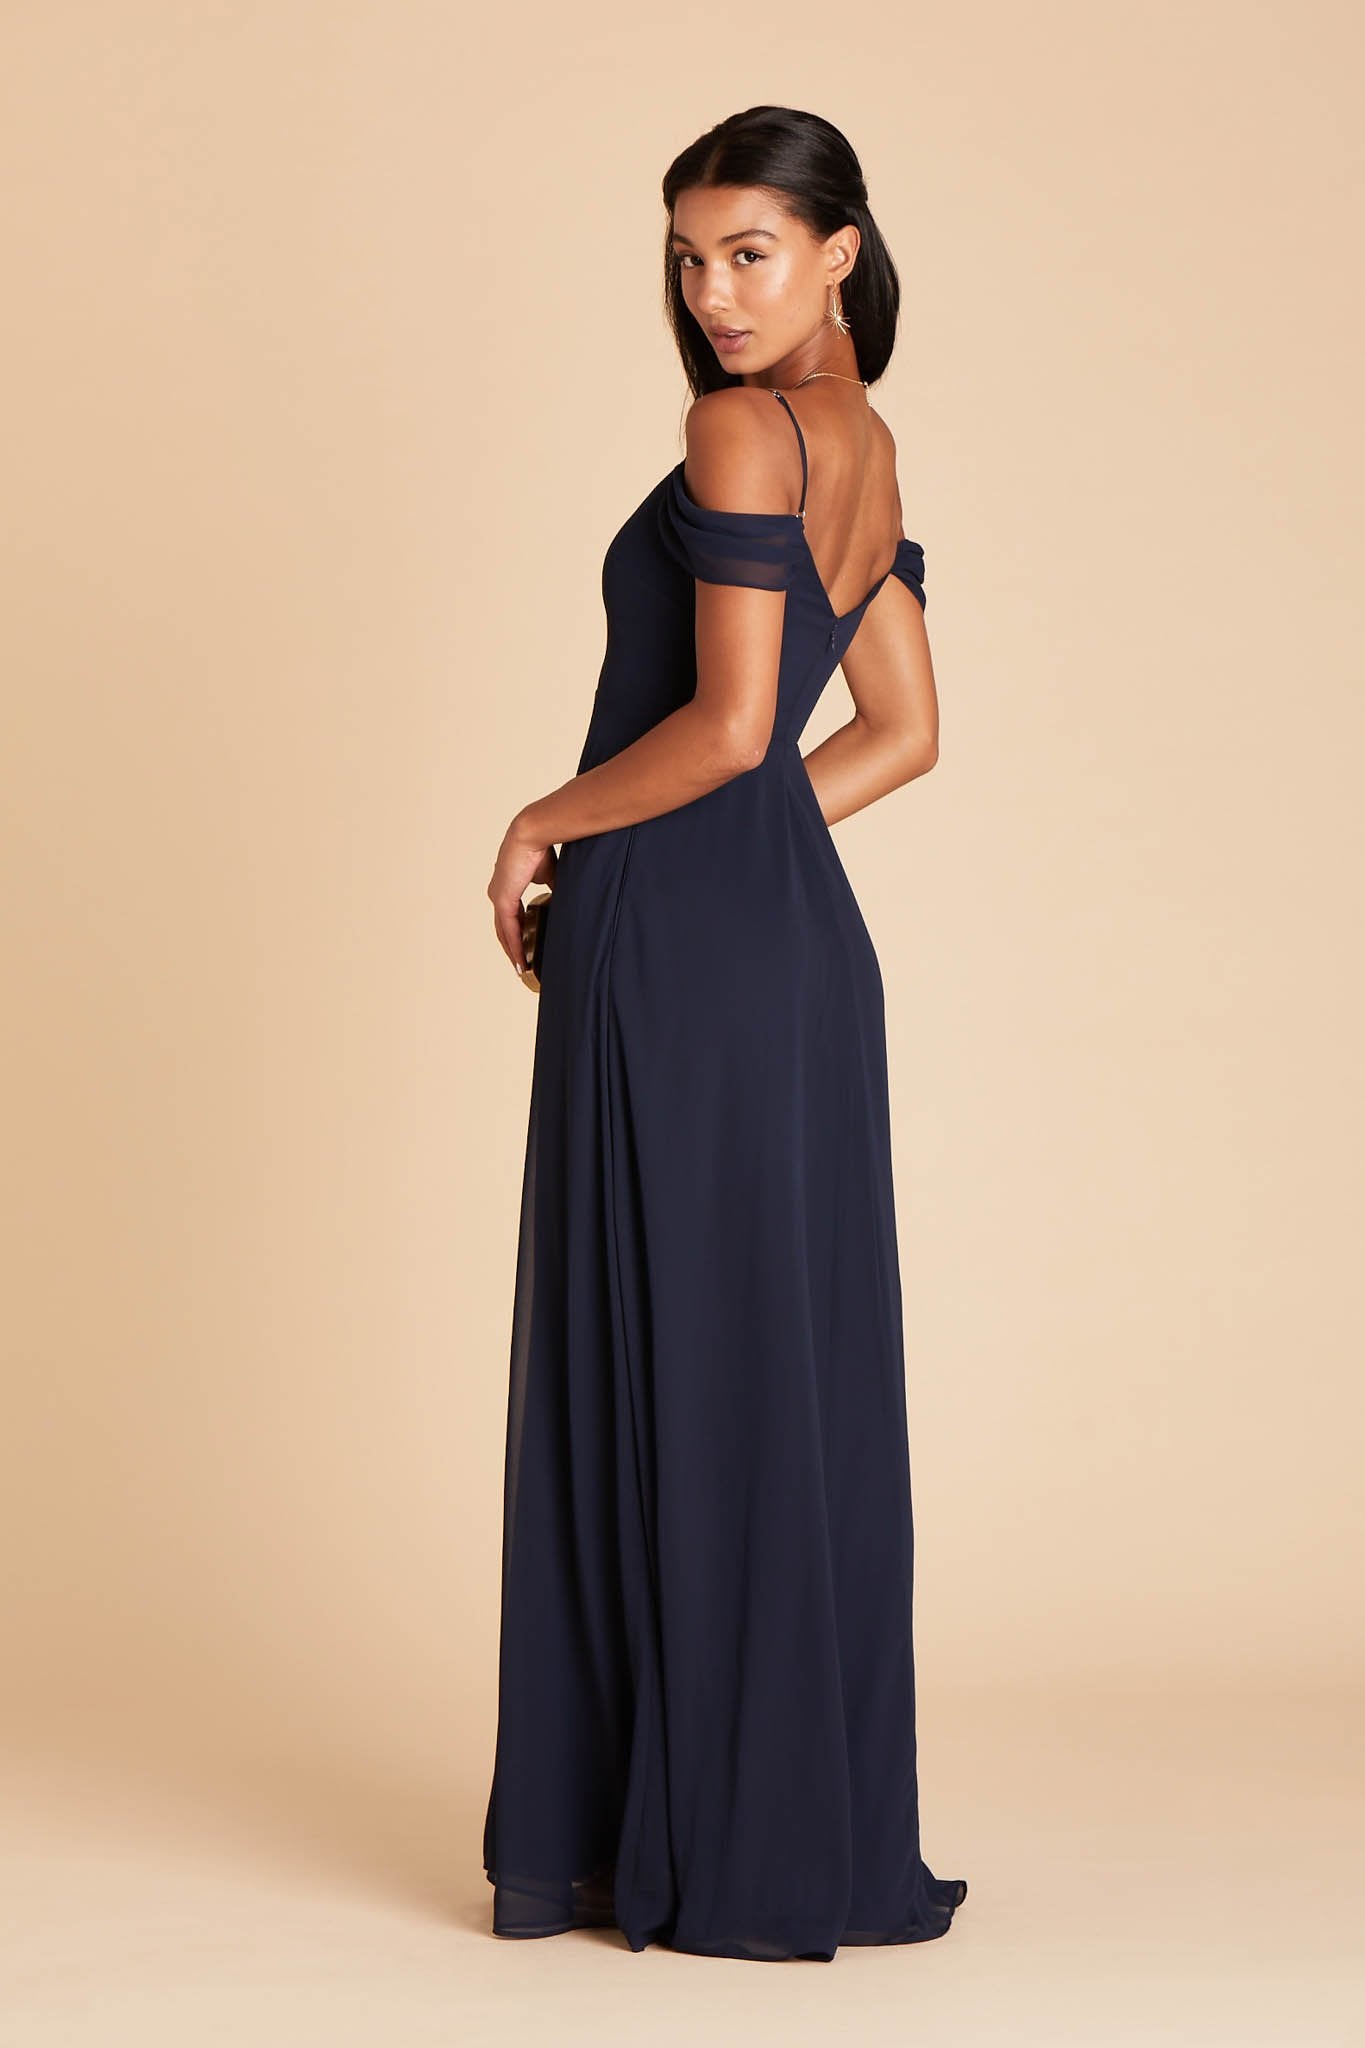 Devin convertible bridesmaid dress in navy blue chiffon by Birdy Grey, side view